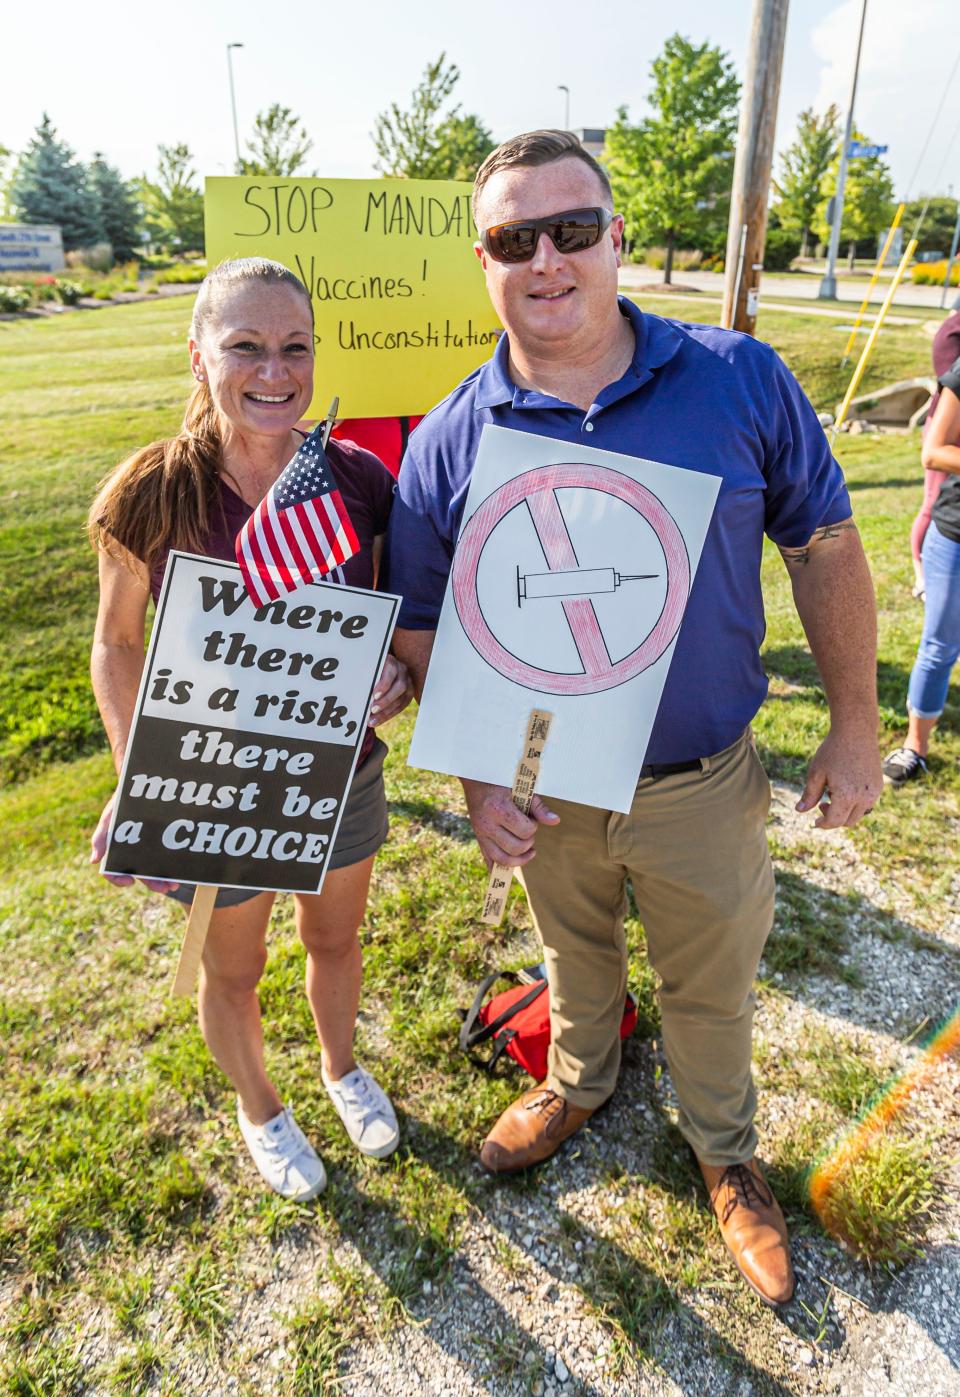 A protestor and Republican candidate for Wisconsin Secretary of State, Justin Schmidtka, stand in front of Ascension SE Wisconsin Hospital in Franklin during a rally against mandatory vaccination versus termination on Friday, August 27, 2021.